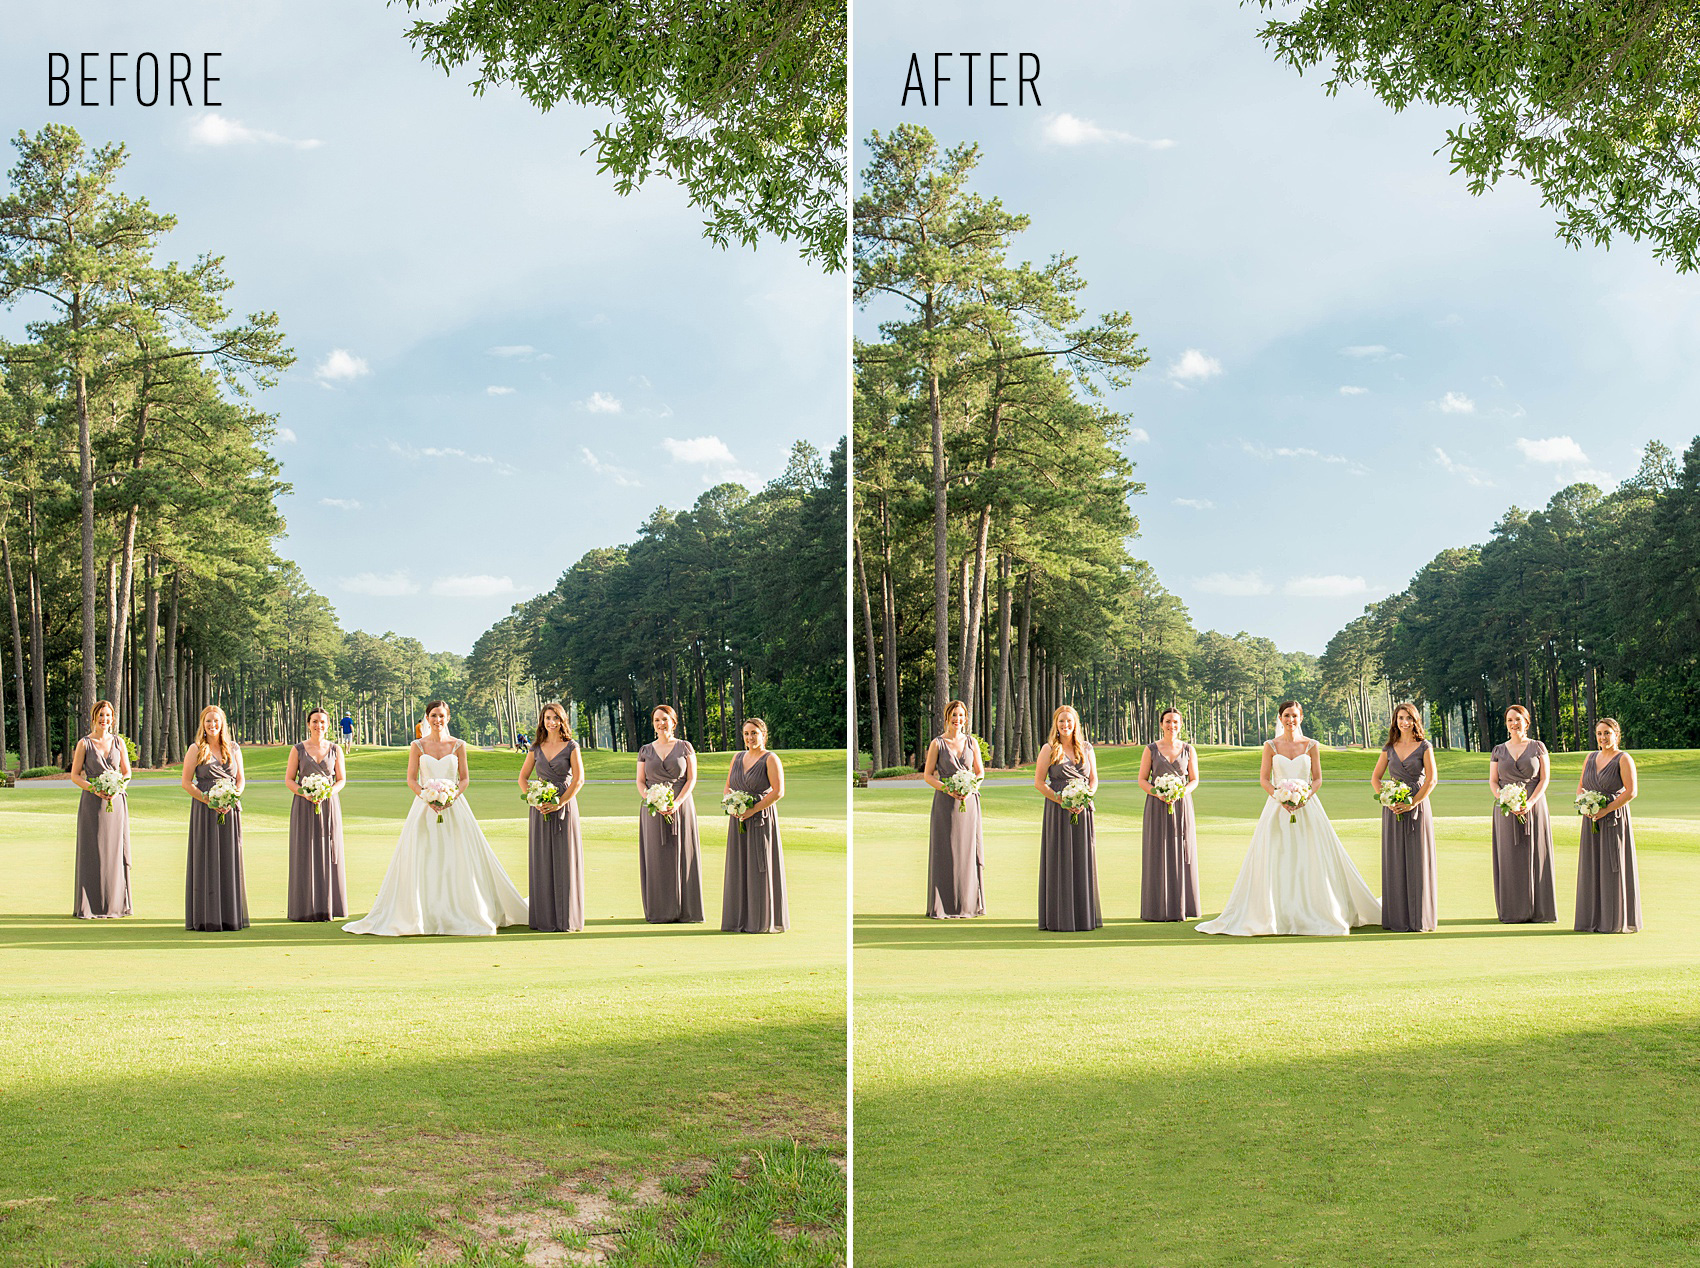 Mikkel Paige Photography, Destination Wedding Photographer and located in Raleigh, North Carolina and NYC, explains the difference you get when you hire her! 